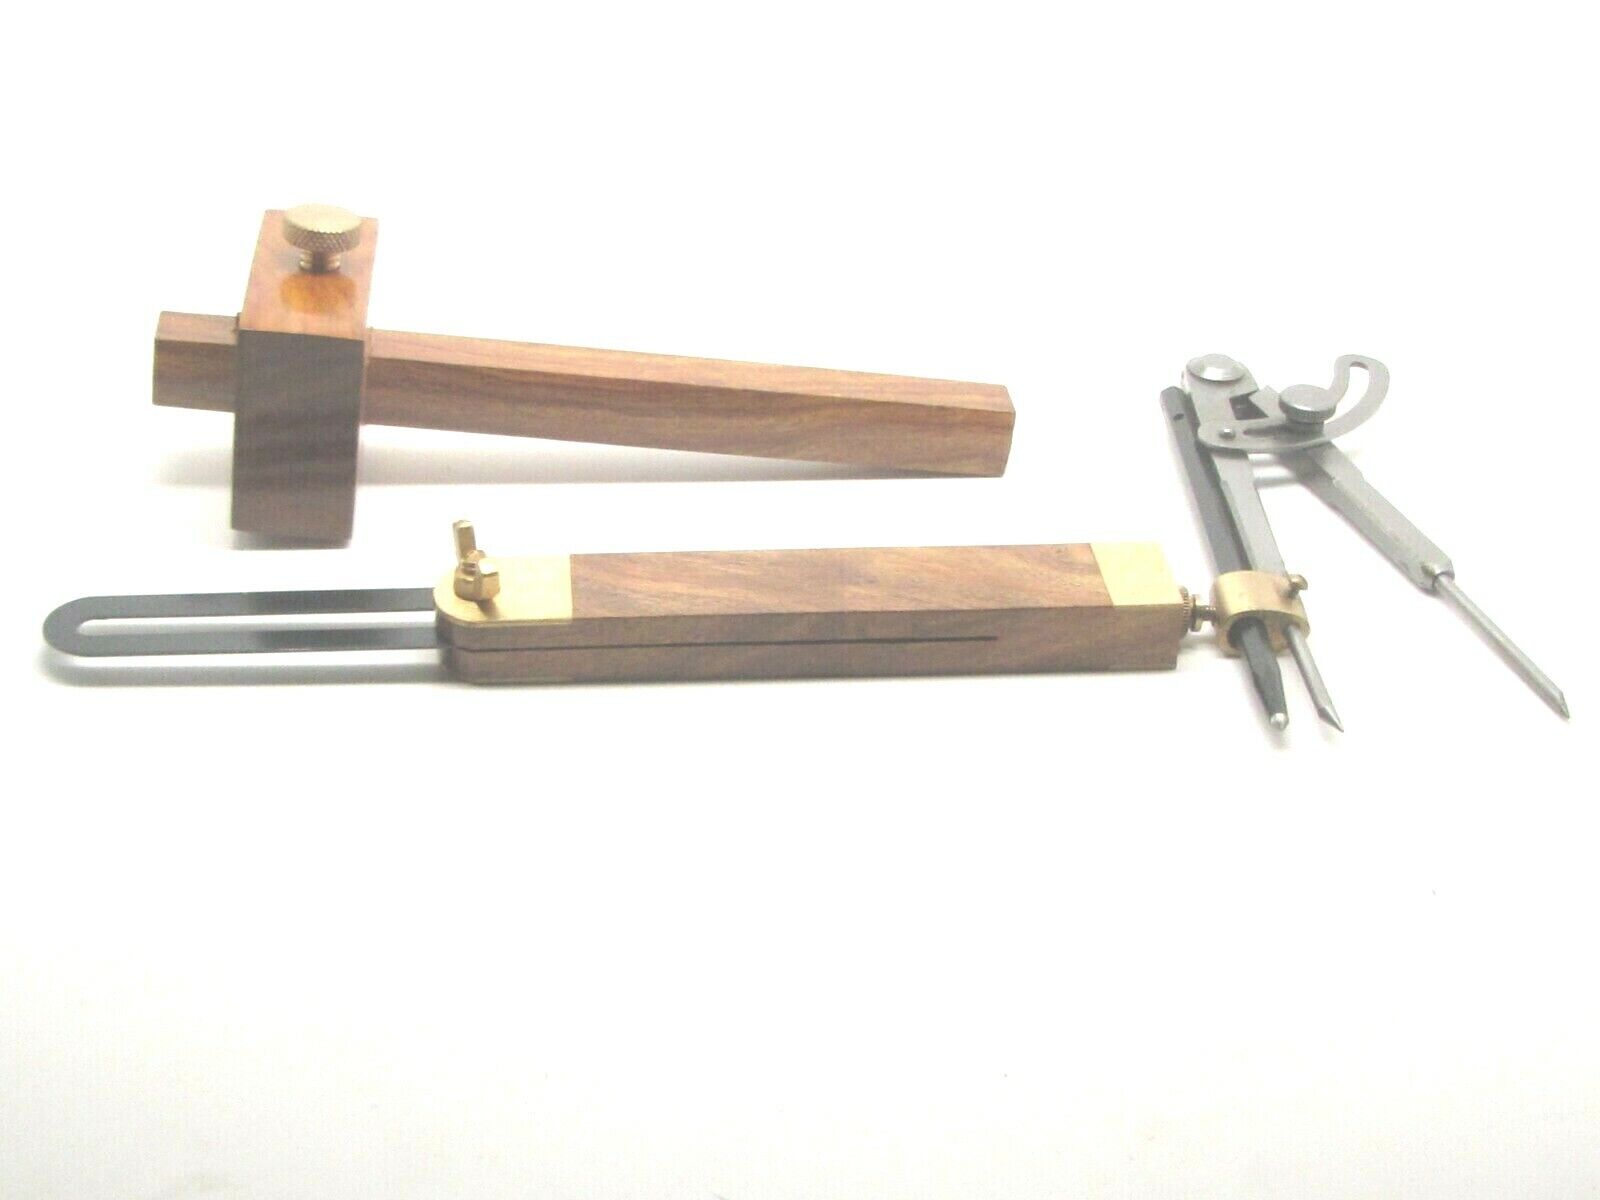 Ramelson Mortise Selling and selling Marking Gauge 9